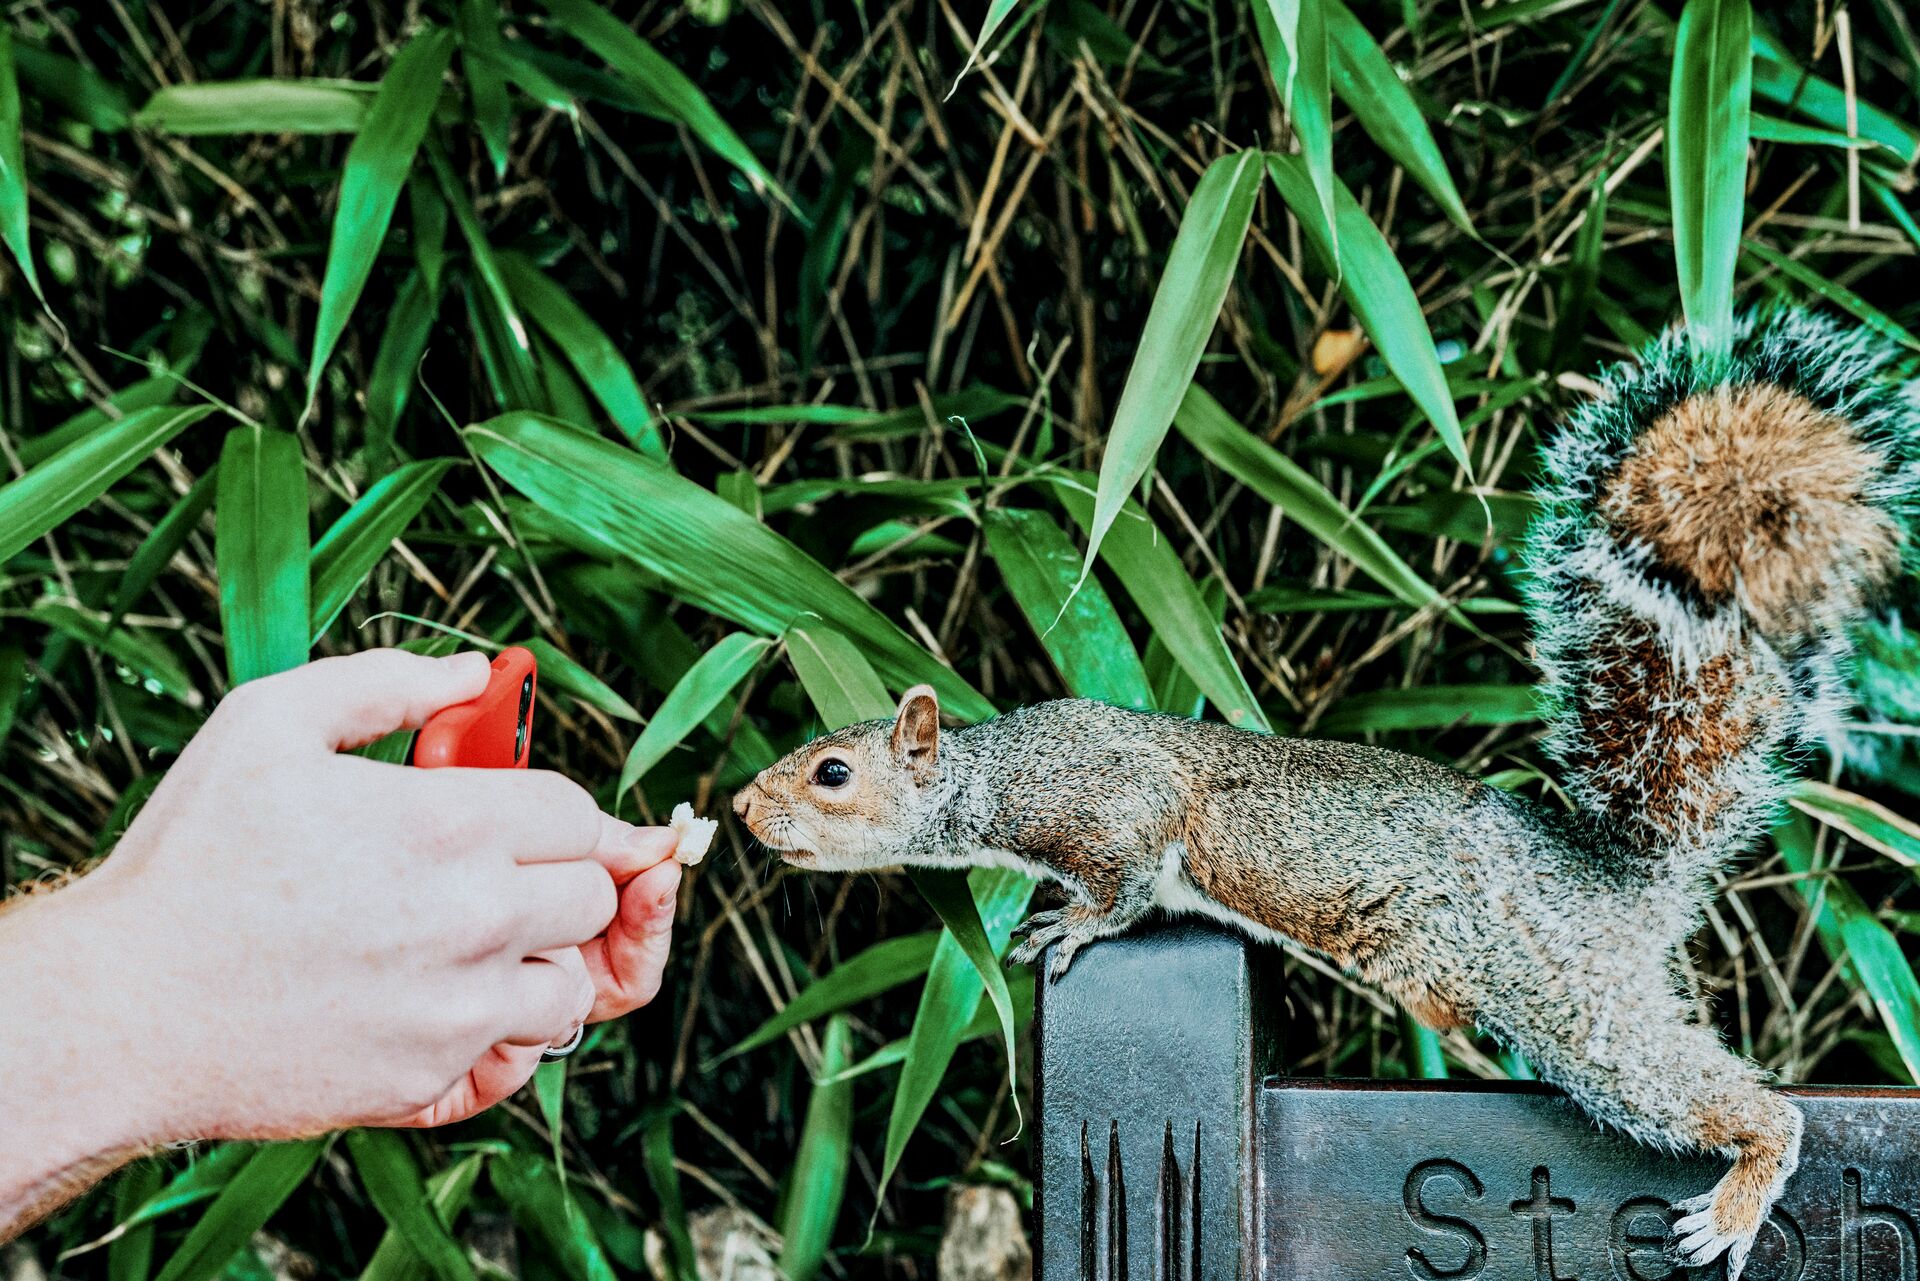 Large_MS PPT_Web-A hand holds a phone and a piece of food in order to feed and photograph a squirrel .jpg